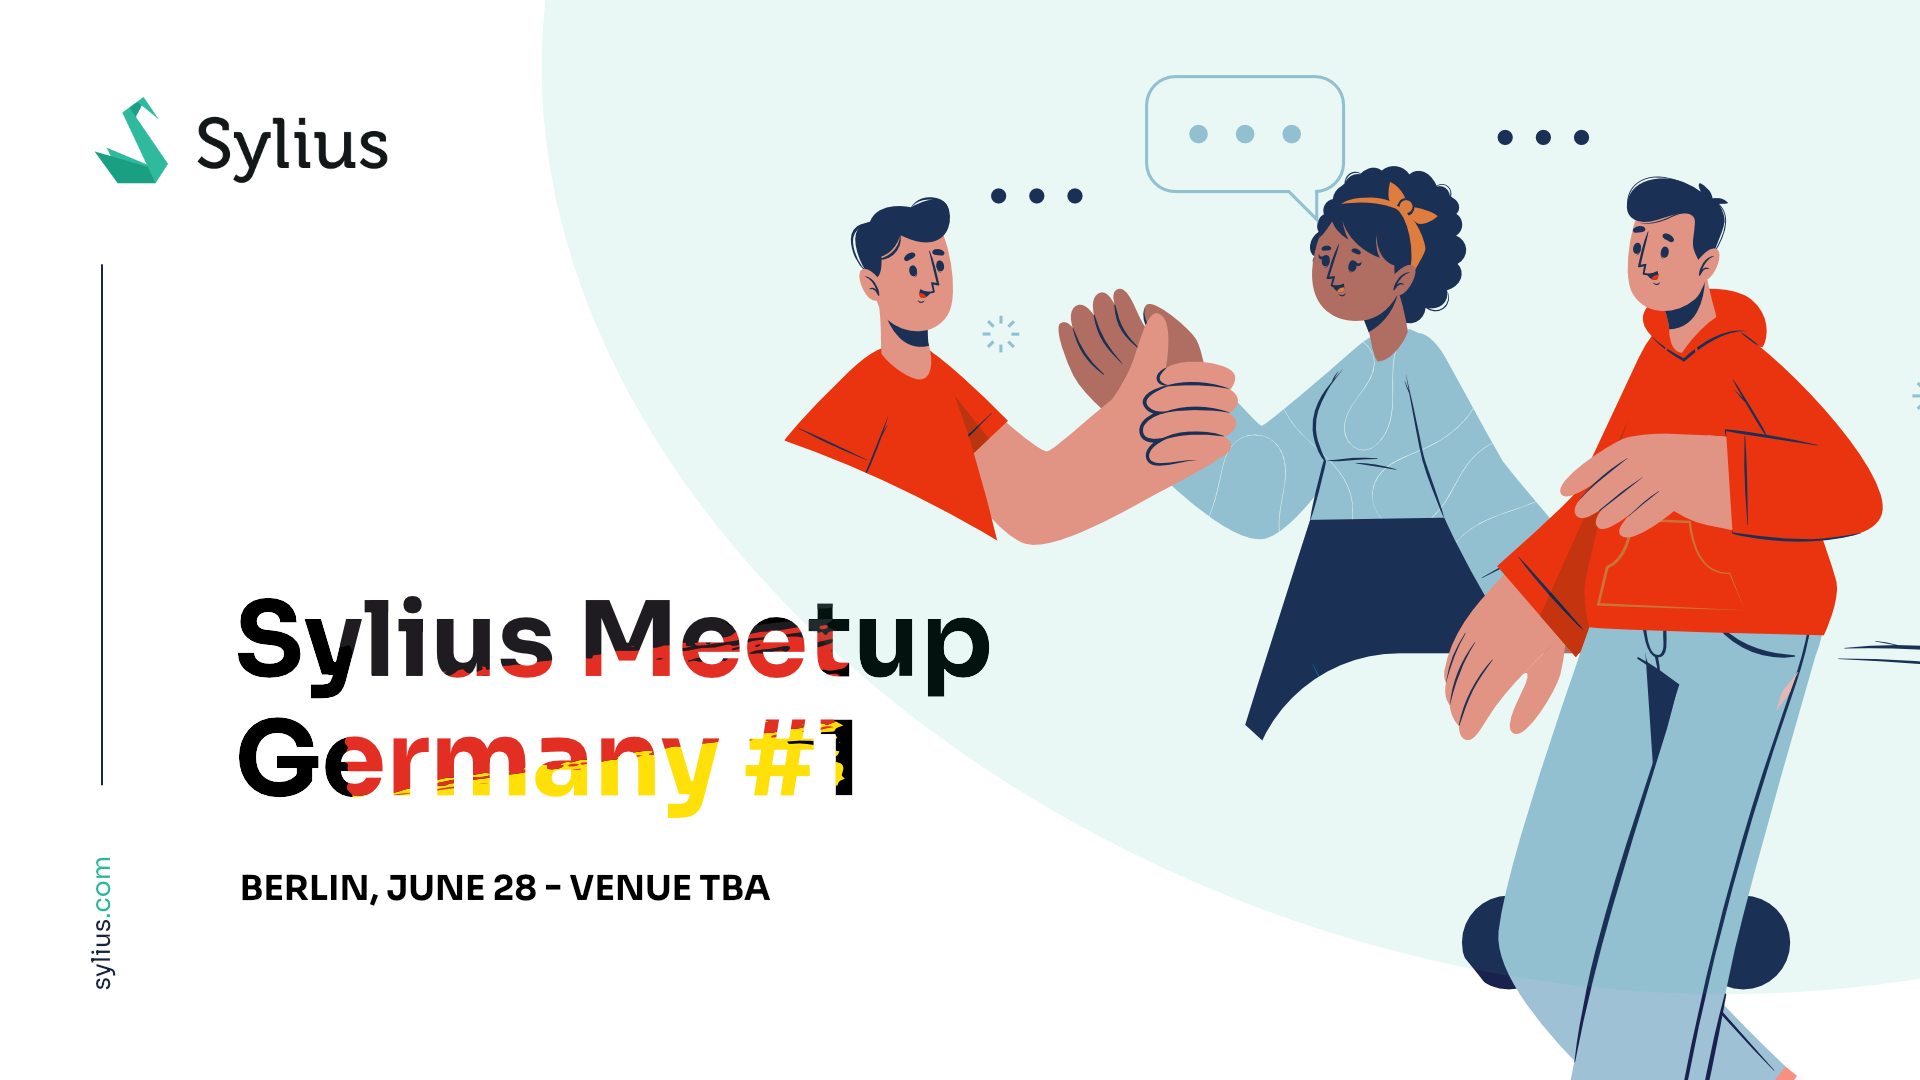 Sylius Germany User Group Meetup #1